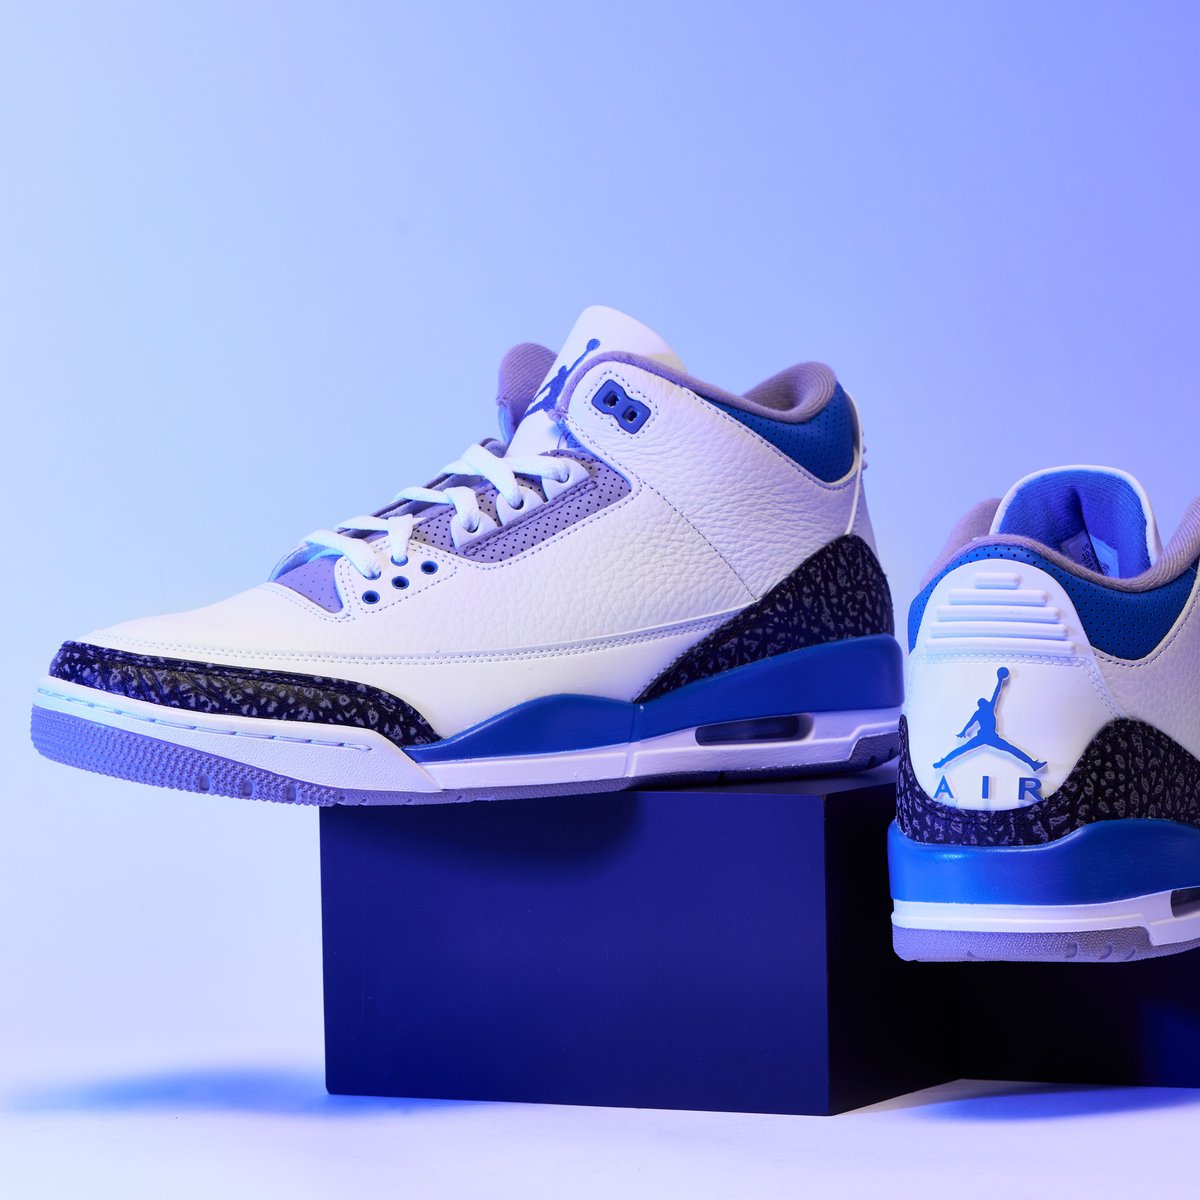 Foot Locker A Timeless Silhouette Jordan Retro 3 Racer Blue Is Now Available In Full Family Sizing Shop T Co Itoyulemyw T Co S7wzmpmjte